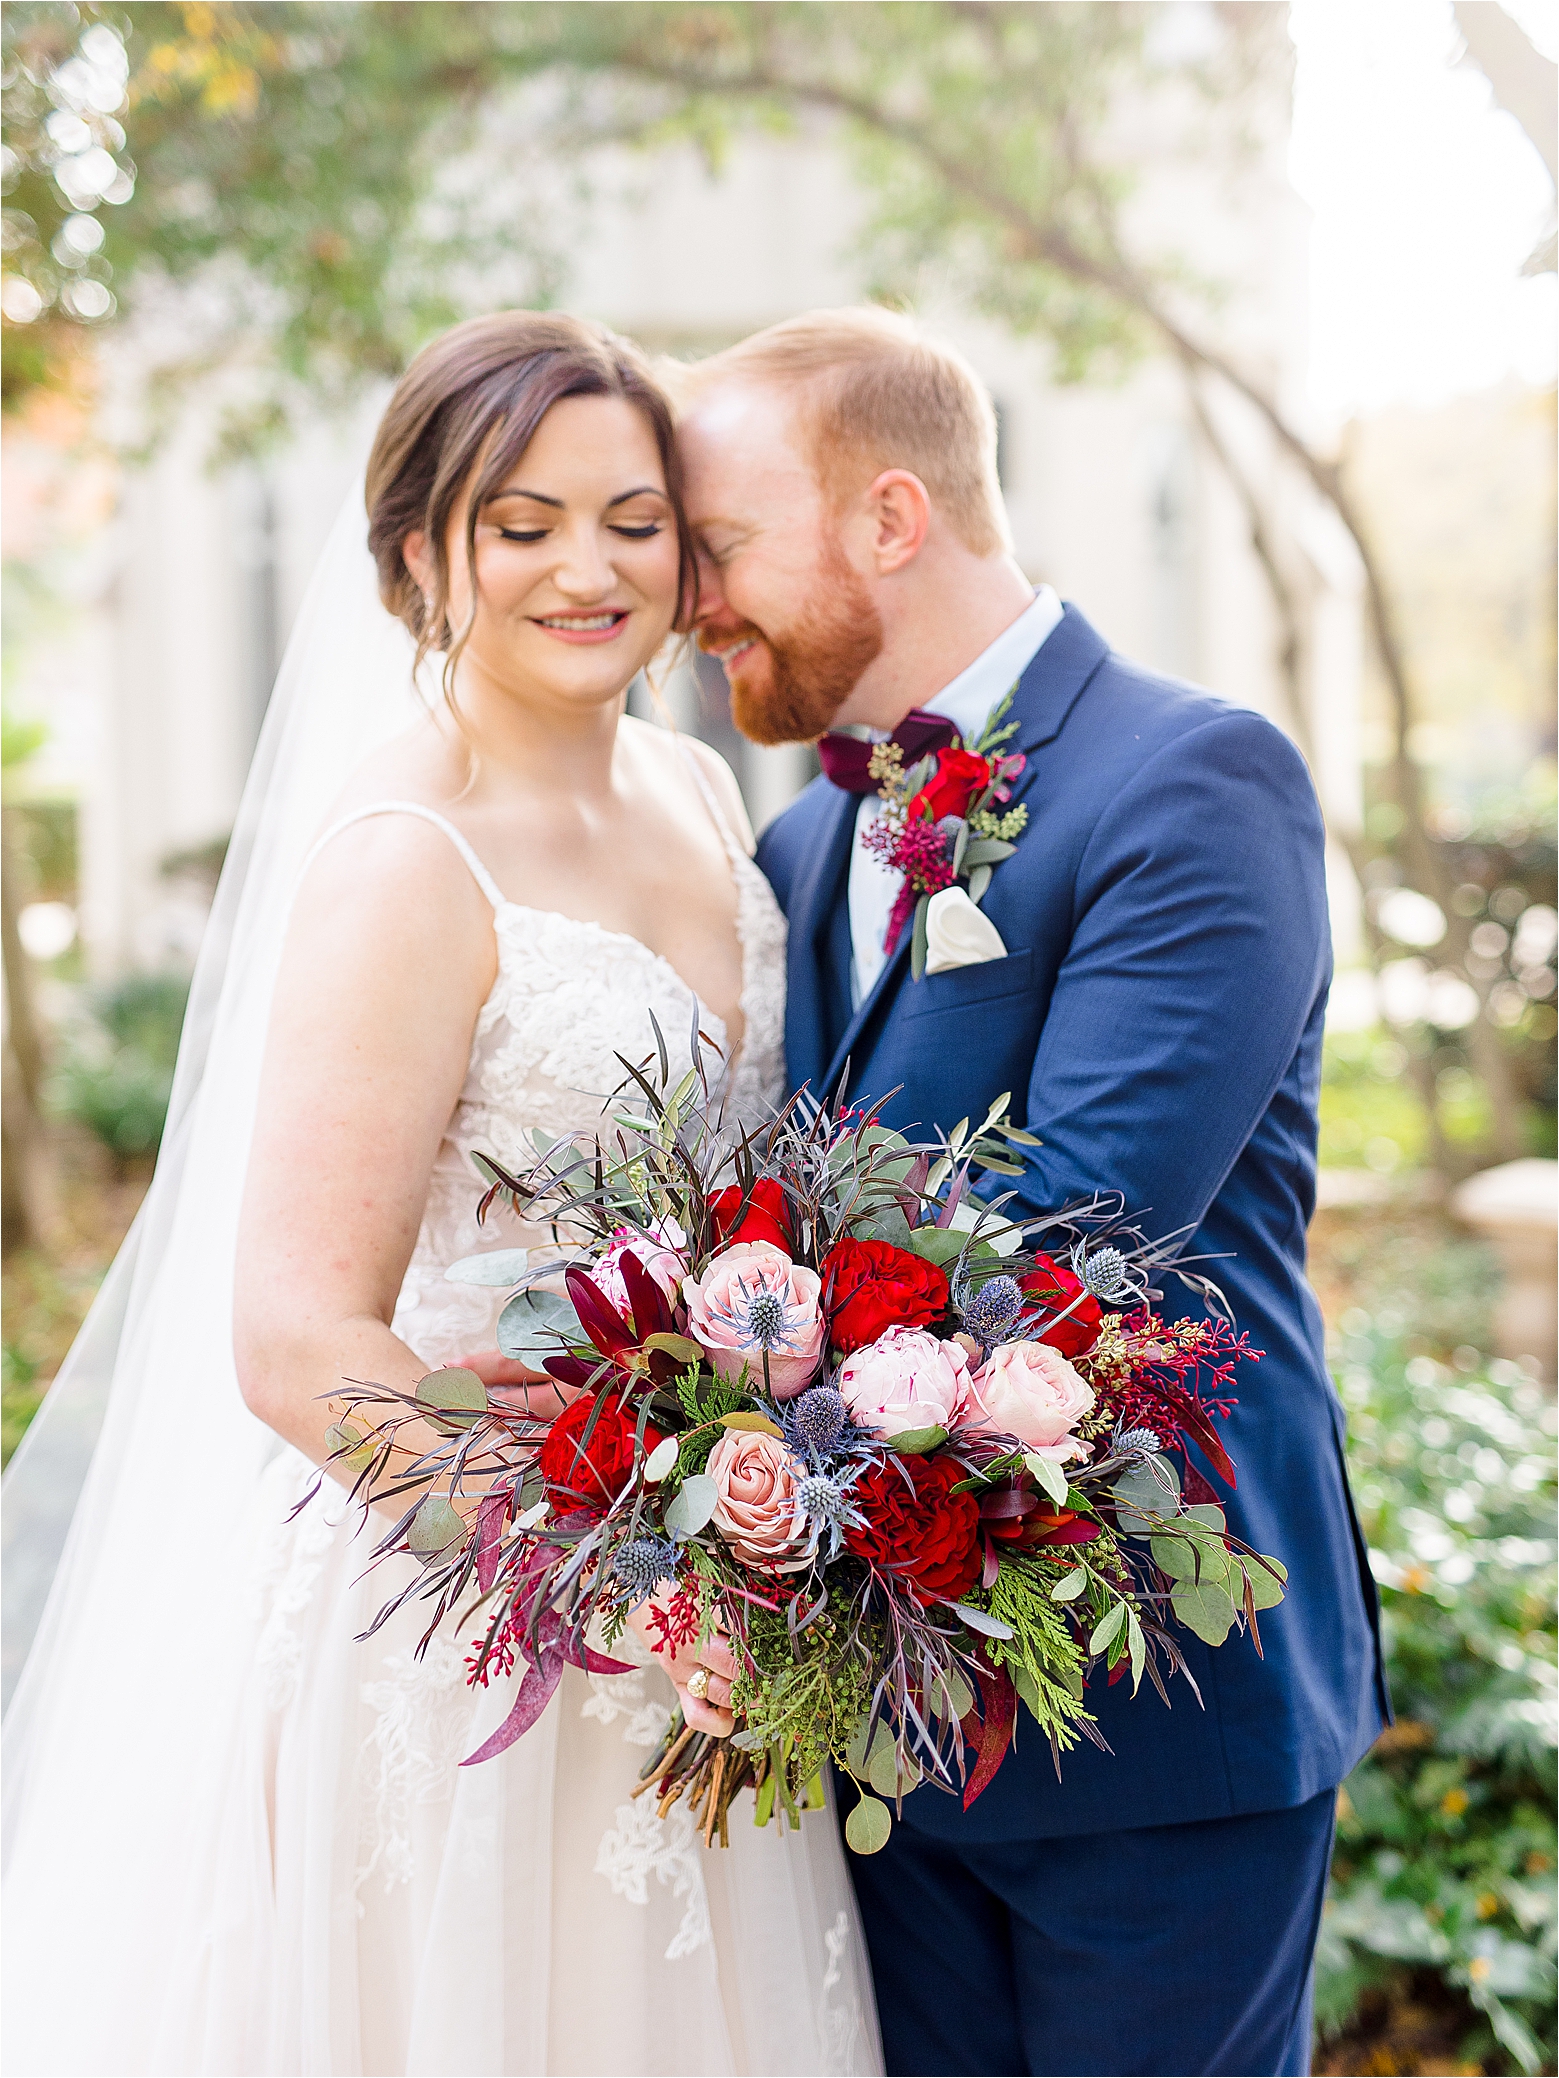 A groom in a navy suite nuzzles into his bride to be as she holds a colorful wedding bouquet and smiles during her San Antonio Wedding 